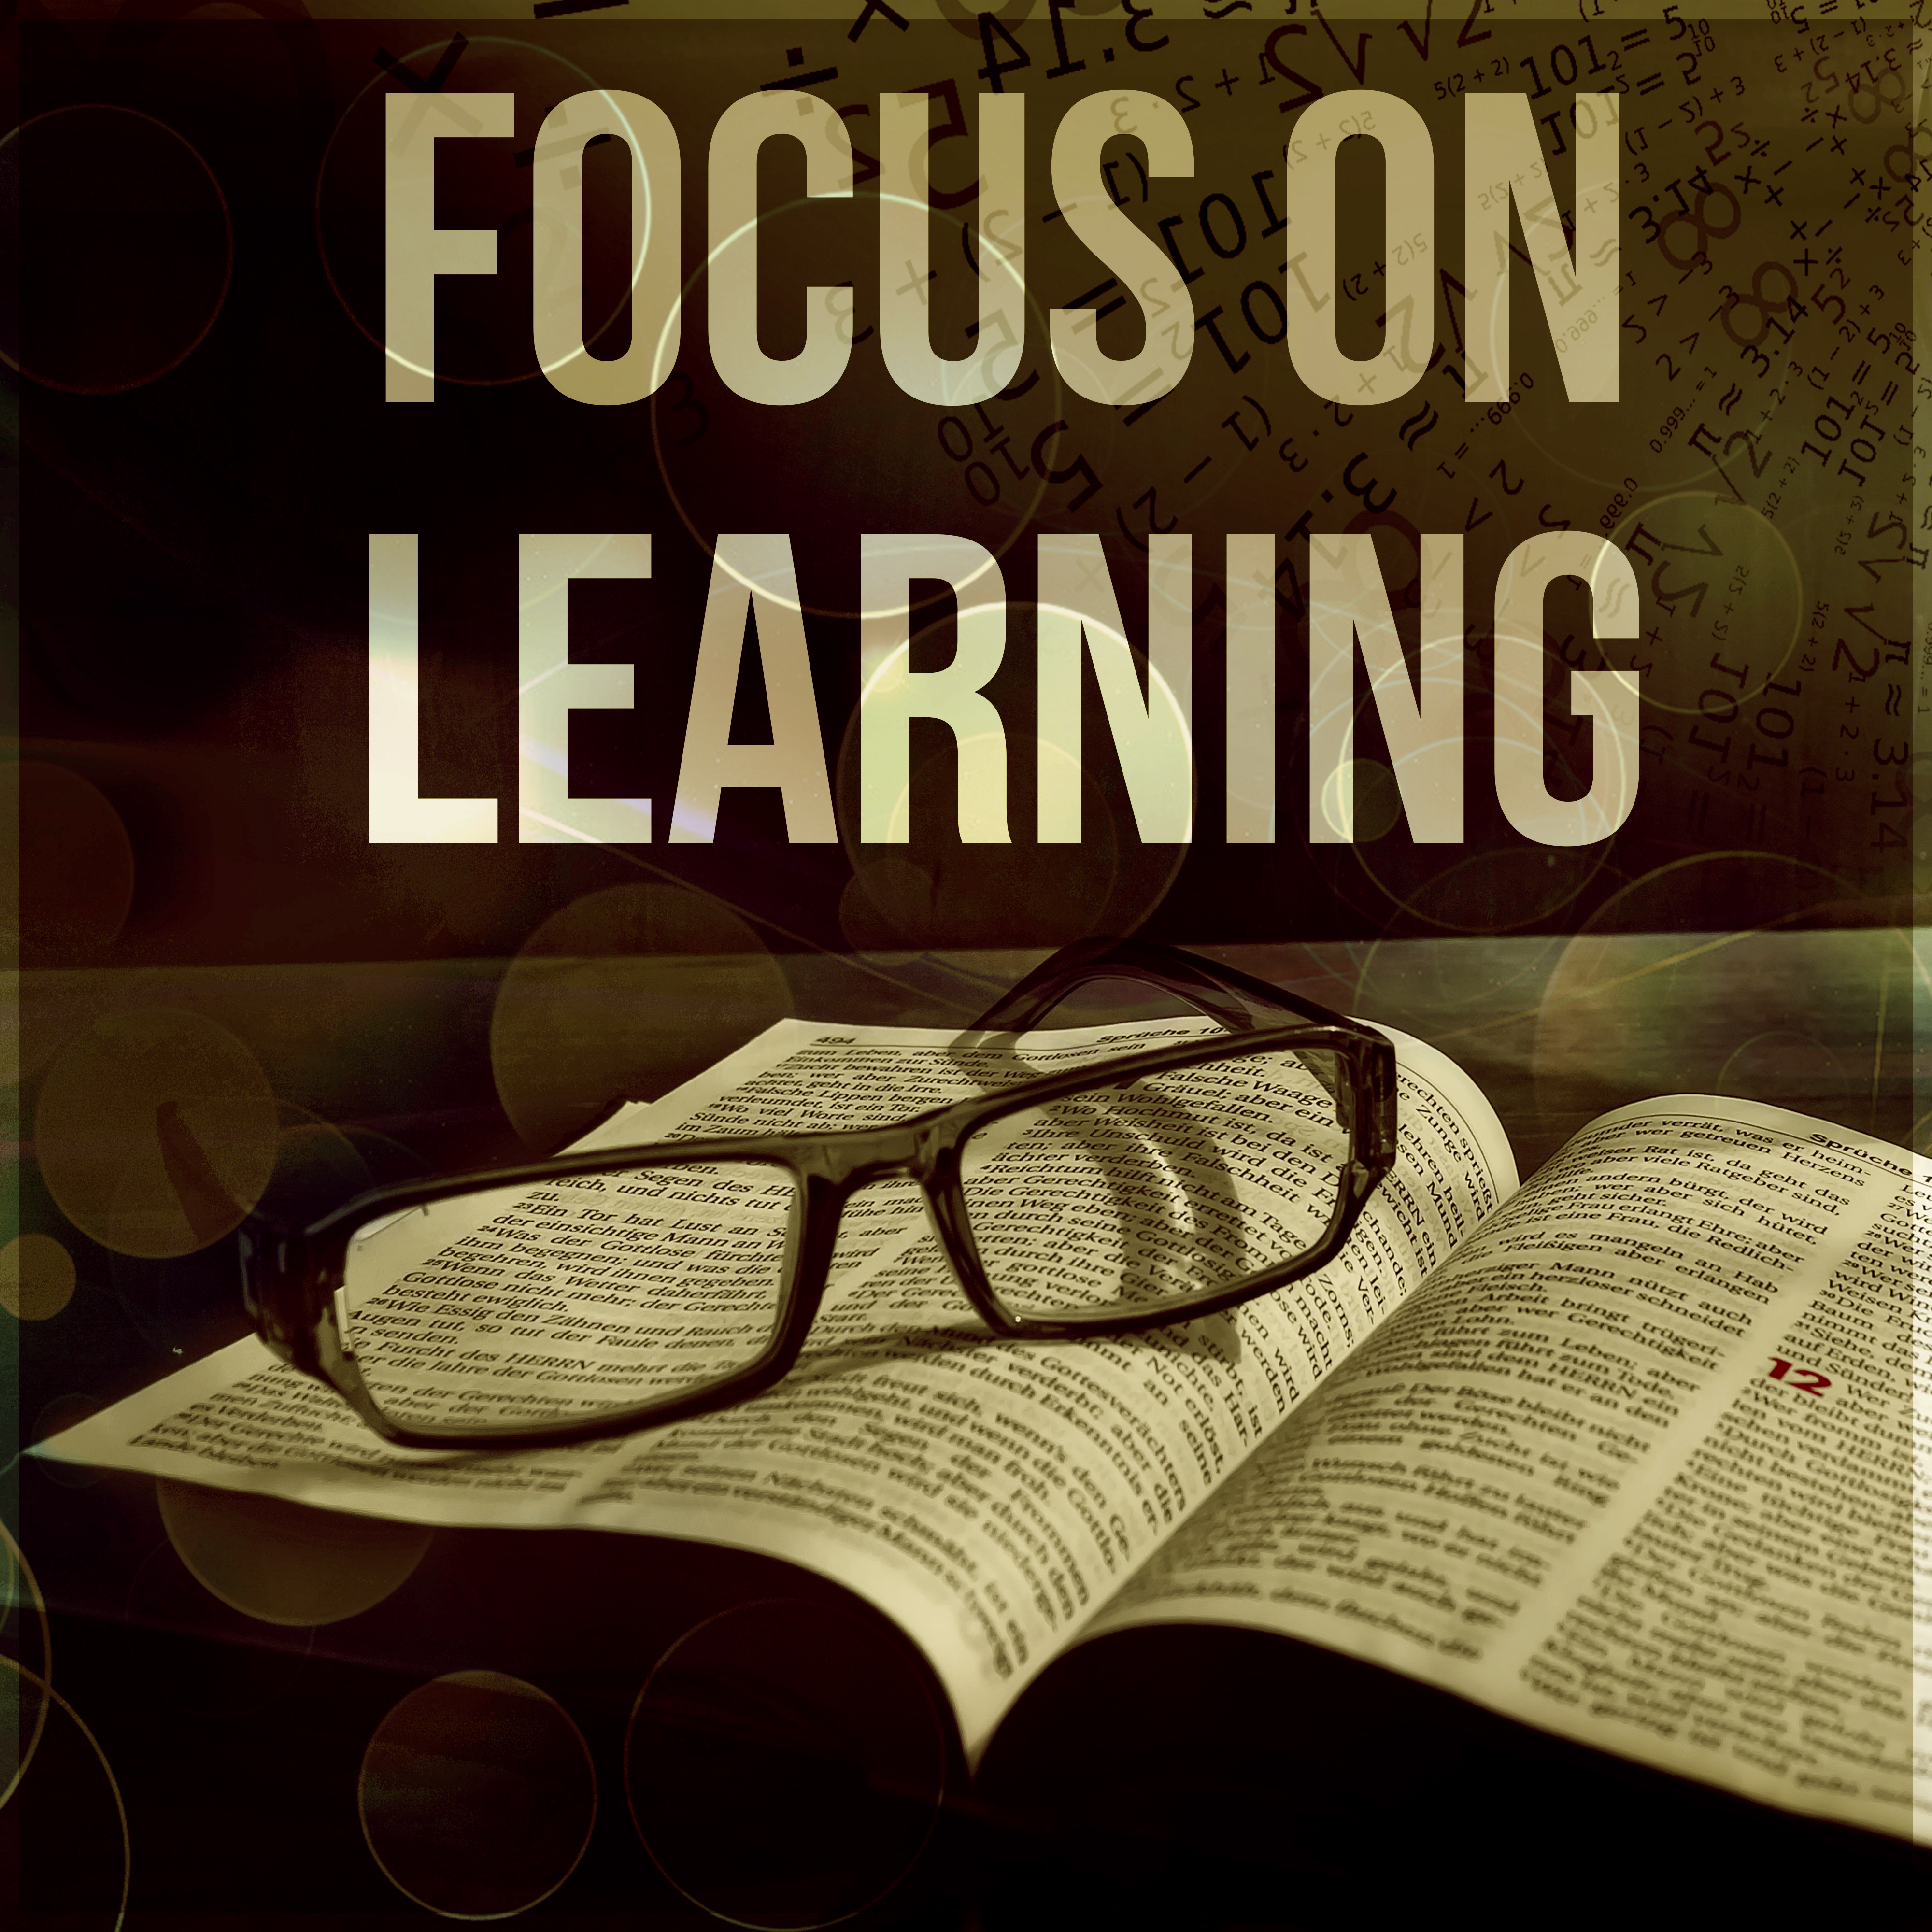 Focus on Learning  Study Music Playlist, Train Your Brain with Instrumental Music to Improve Memory, Focus  Concentration, Easy Learning